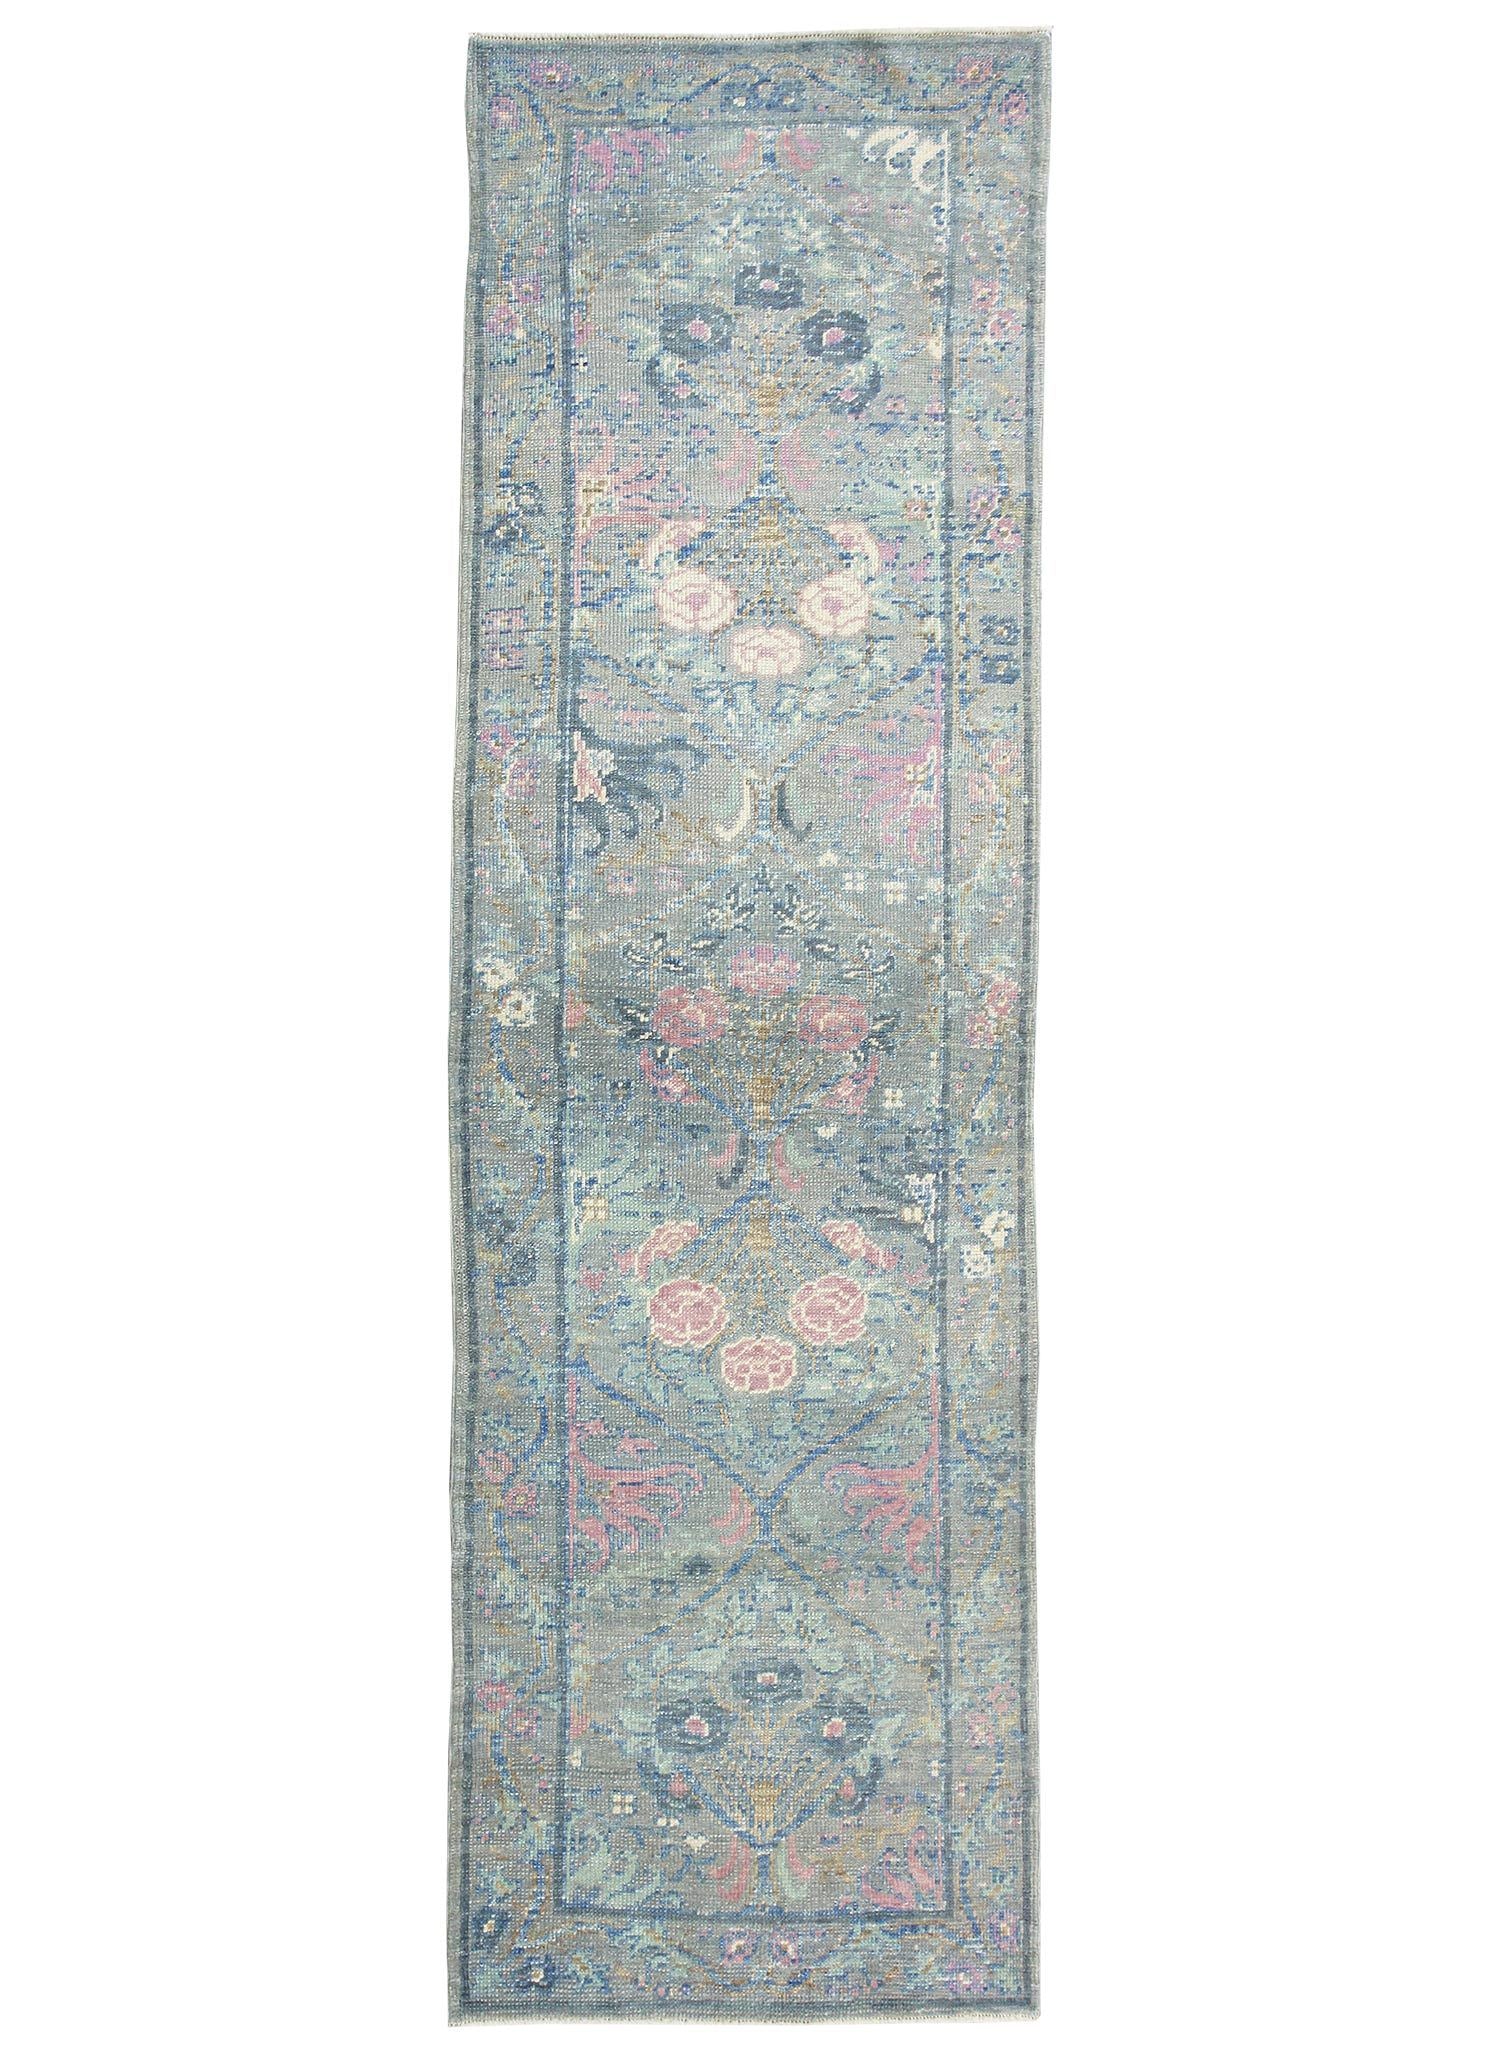 Arts & Crafts Handwoven Traditional Rug